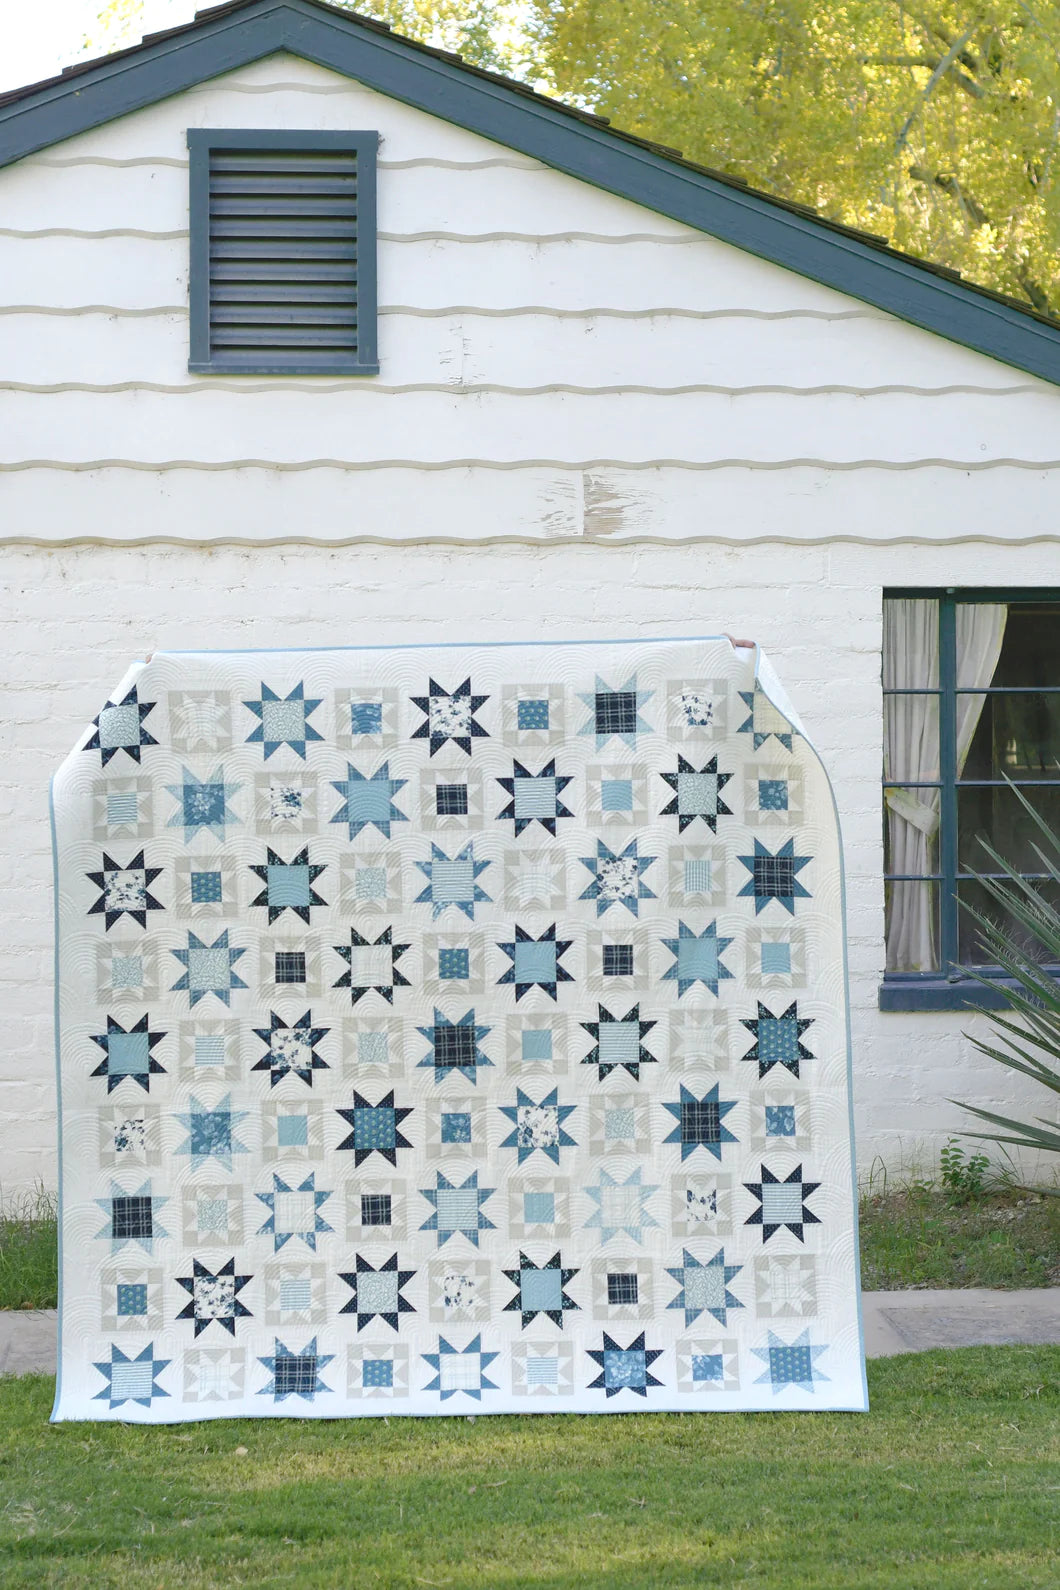 Sand and Sea Quilt Pattern - Camille Rosskelly for Thimbleblossoms